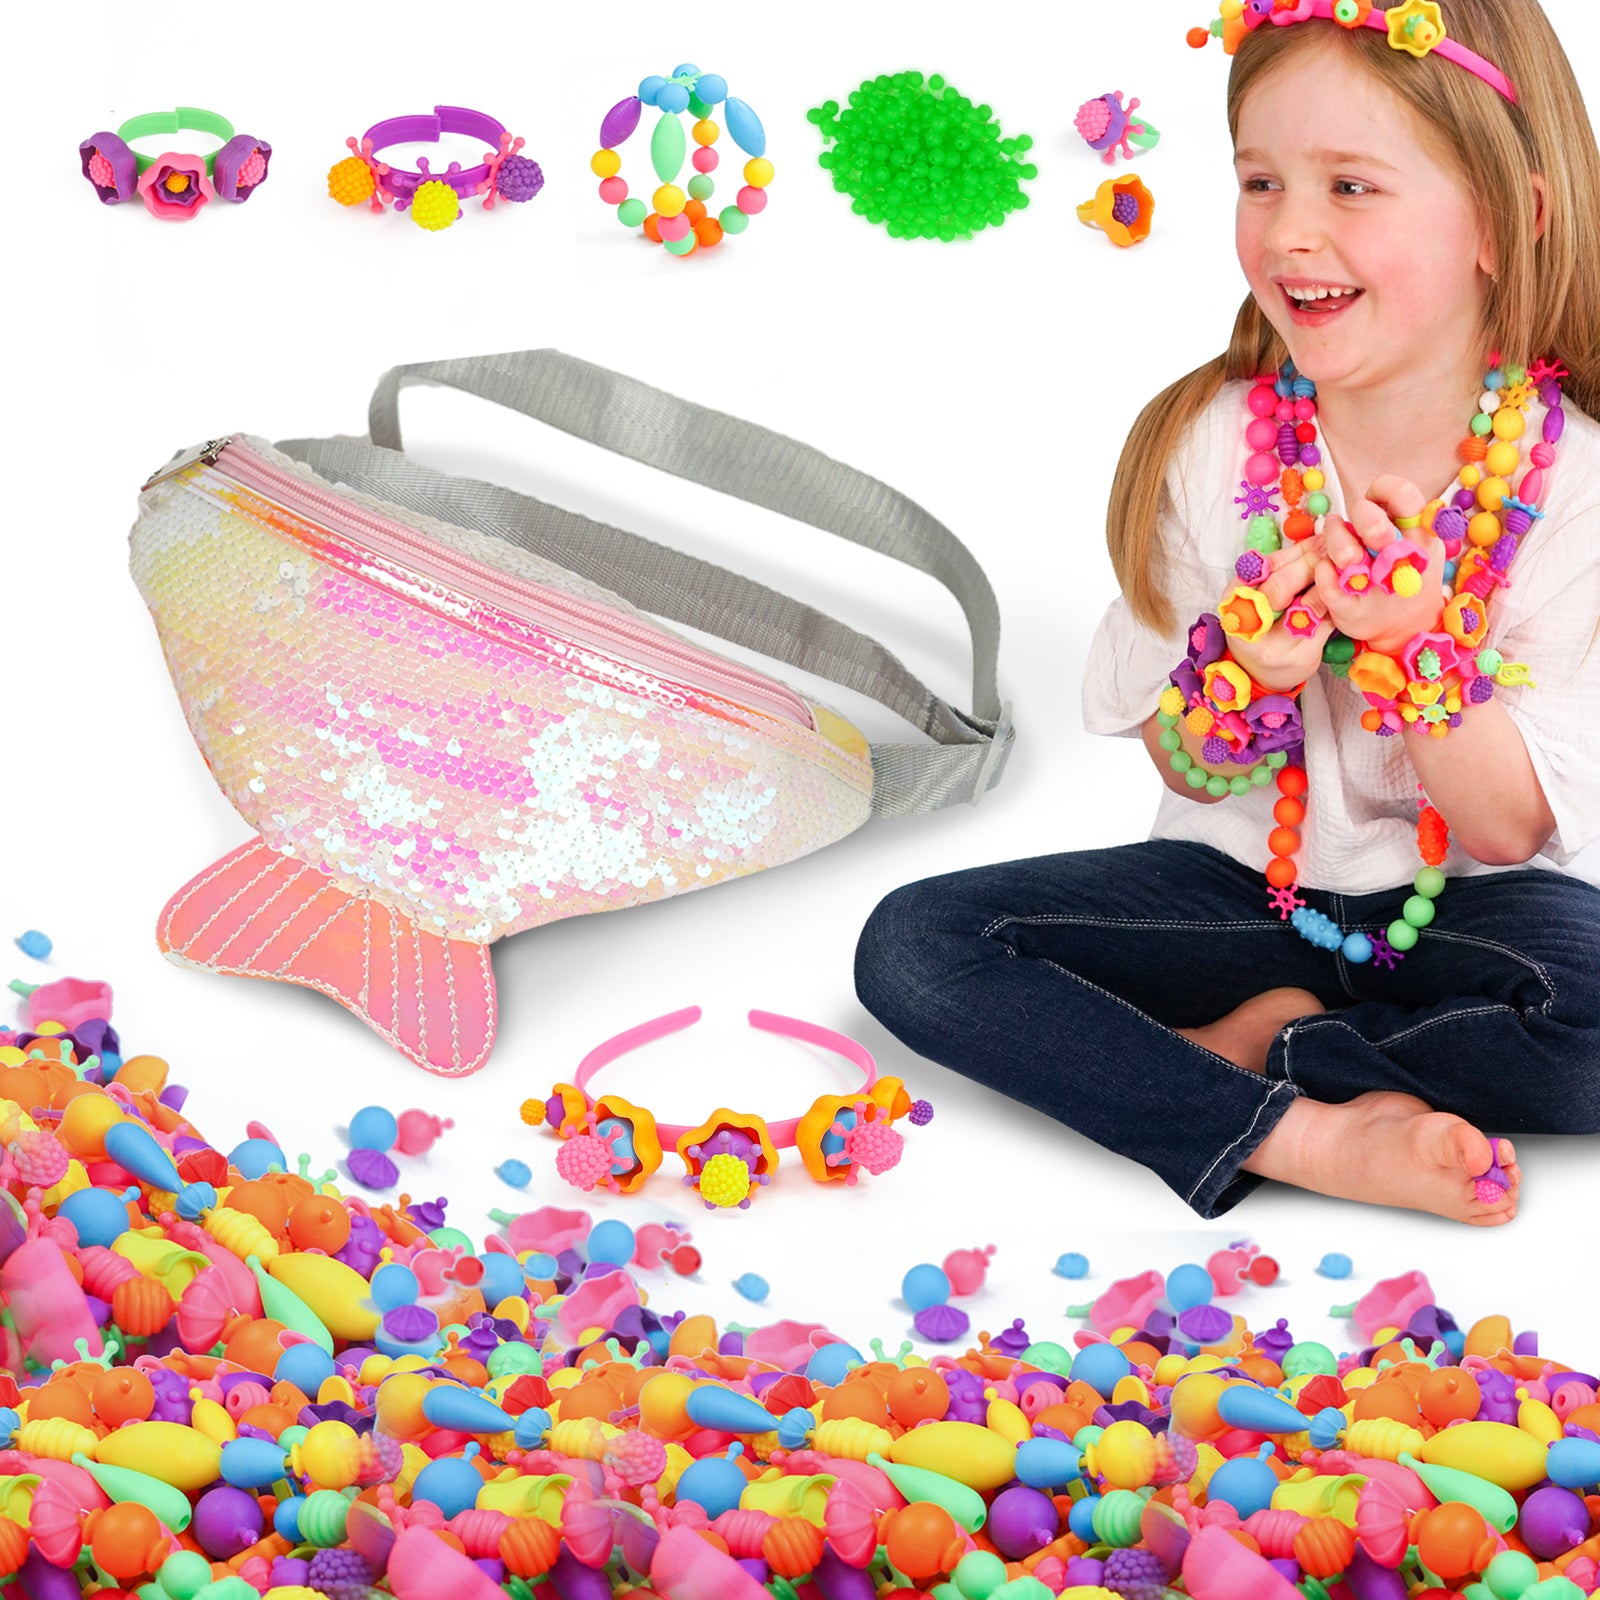 Pop Beads Jewelry making Kit for Kids, Jewelry making Crafts with Sequin Hip bag - Axel Adventures